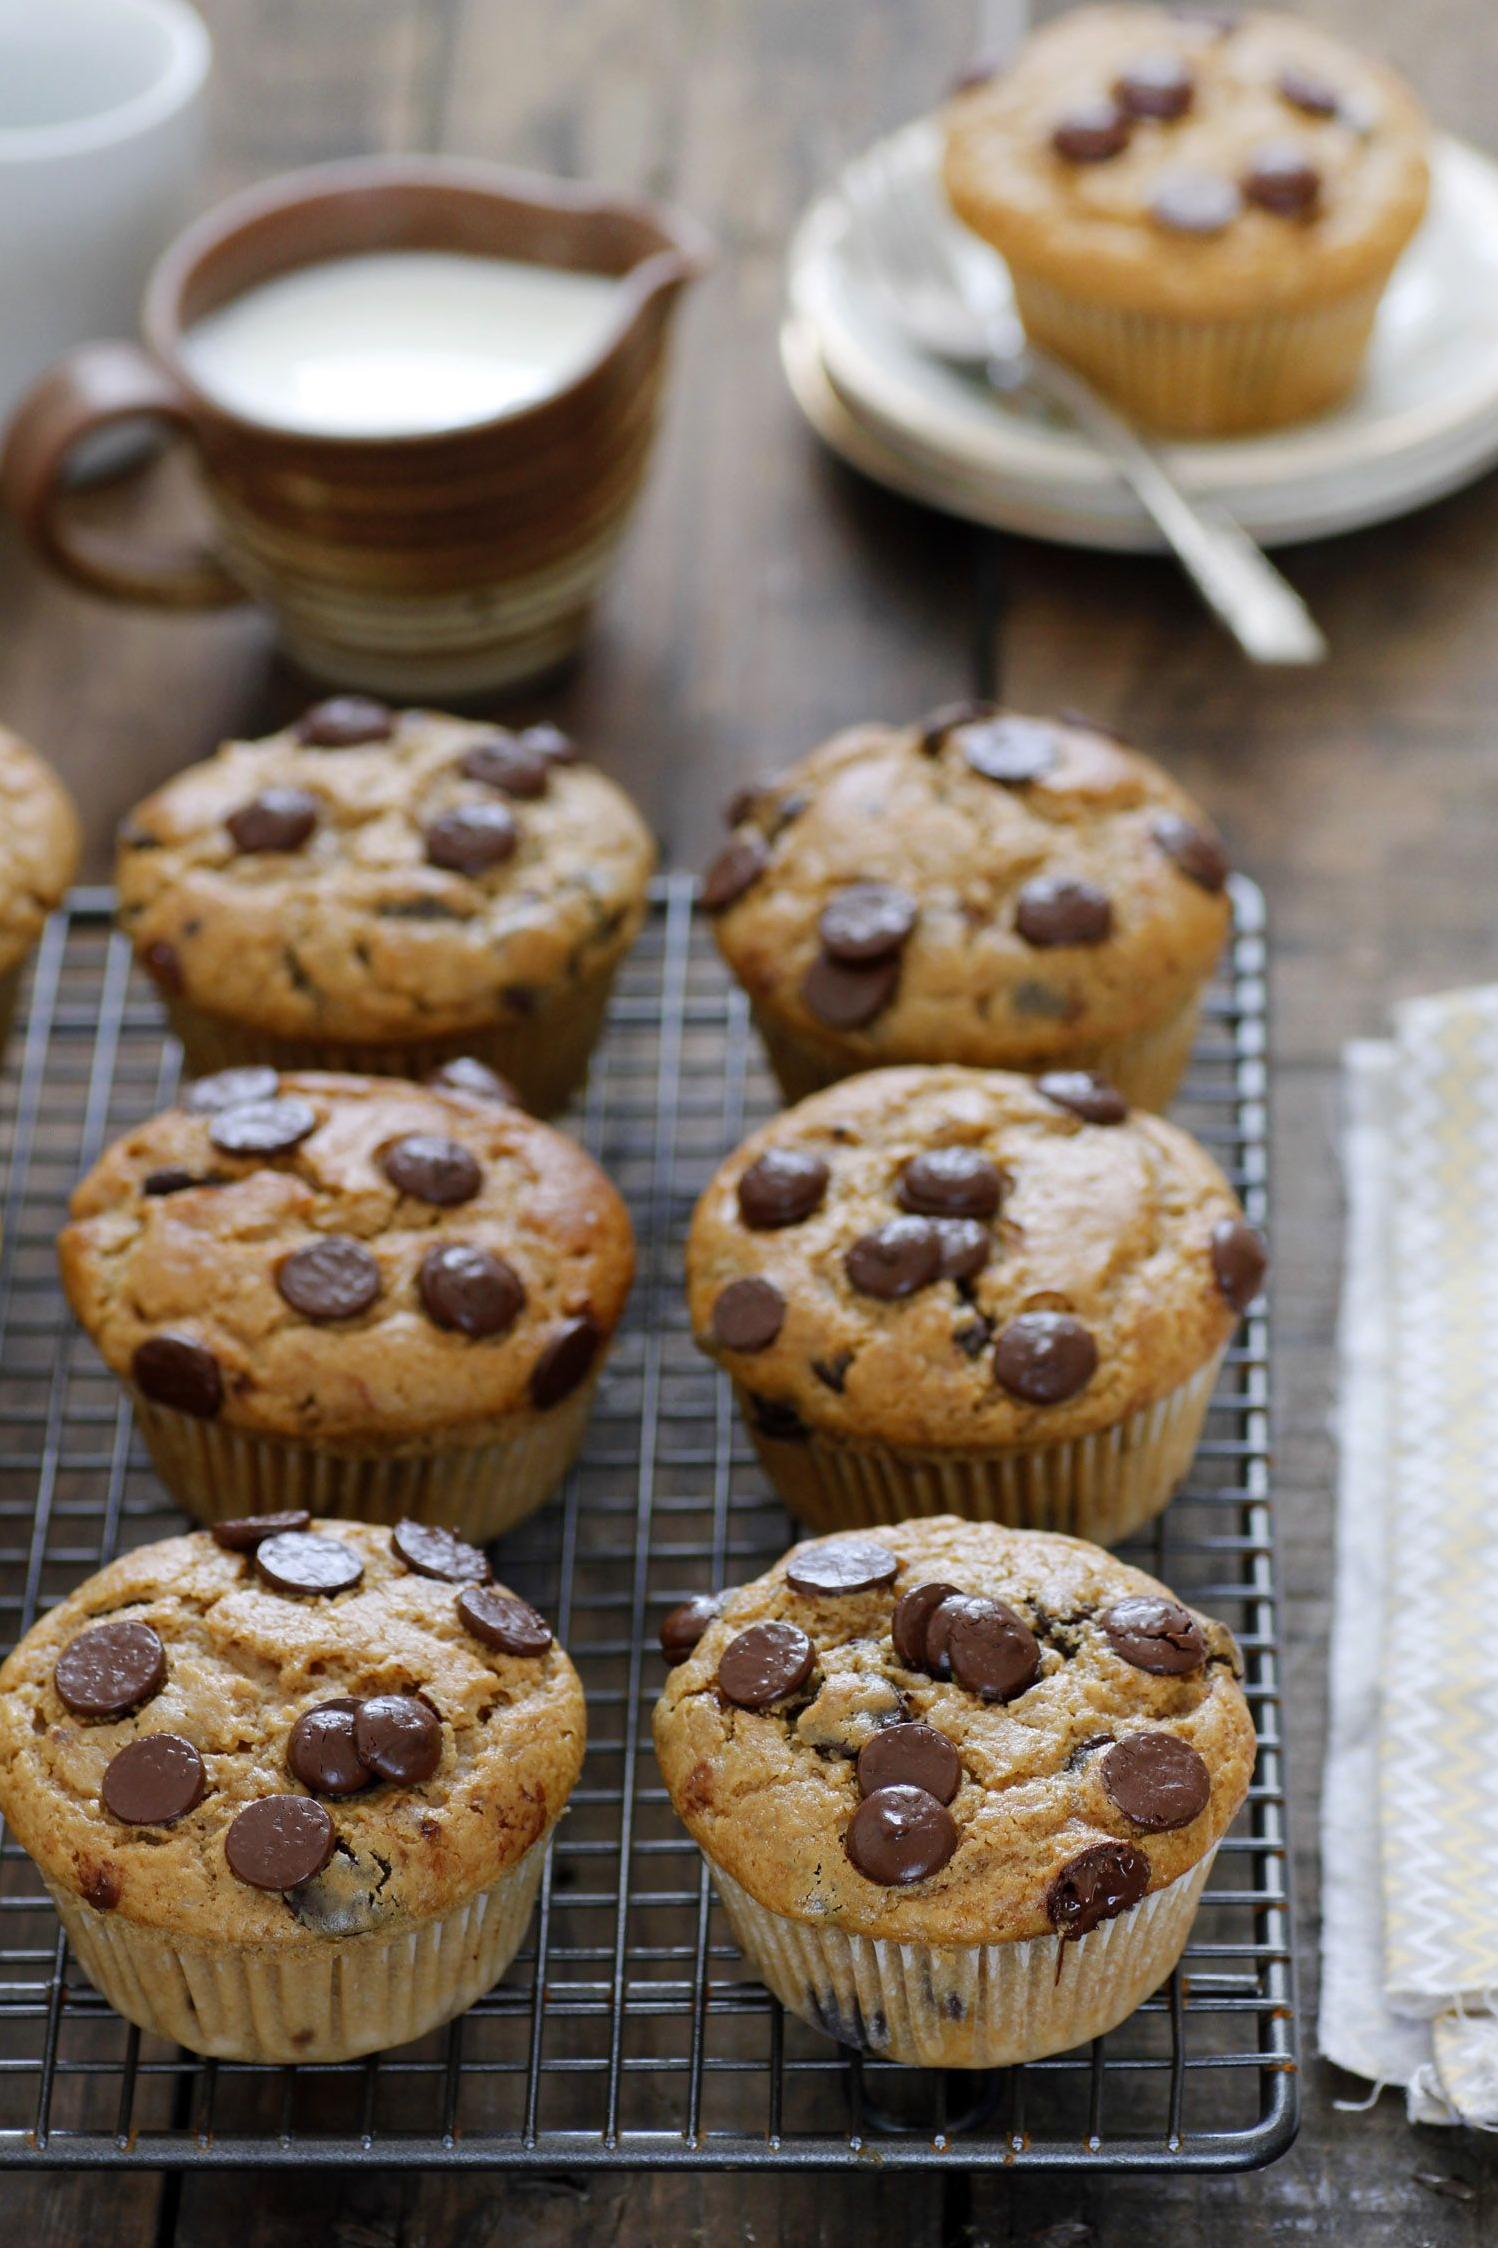  Start the day on a sweet note with a batch of these delicious muffins.